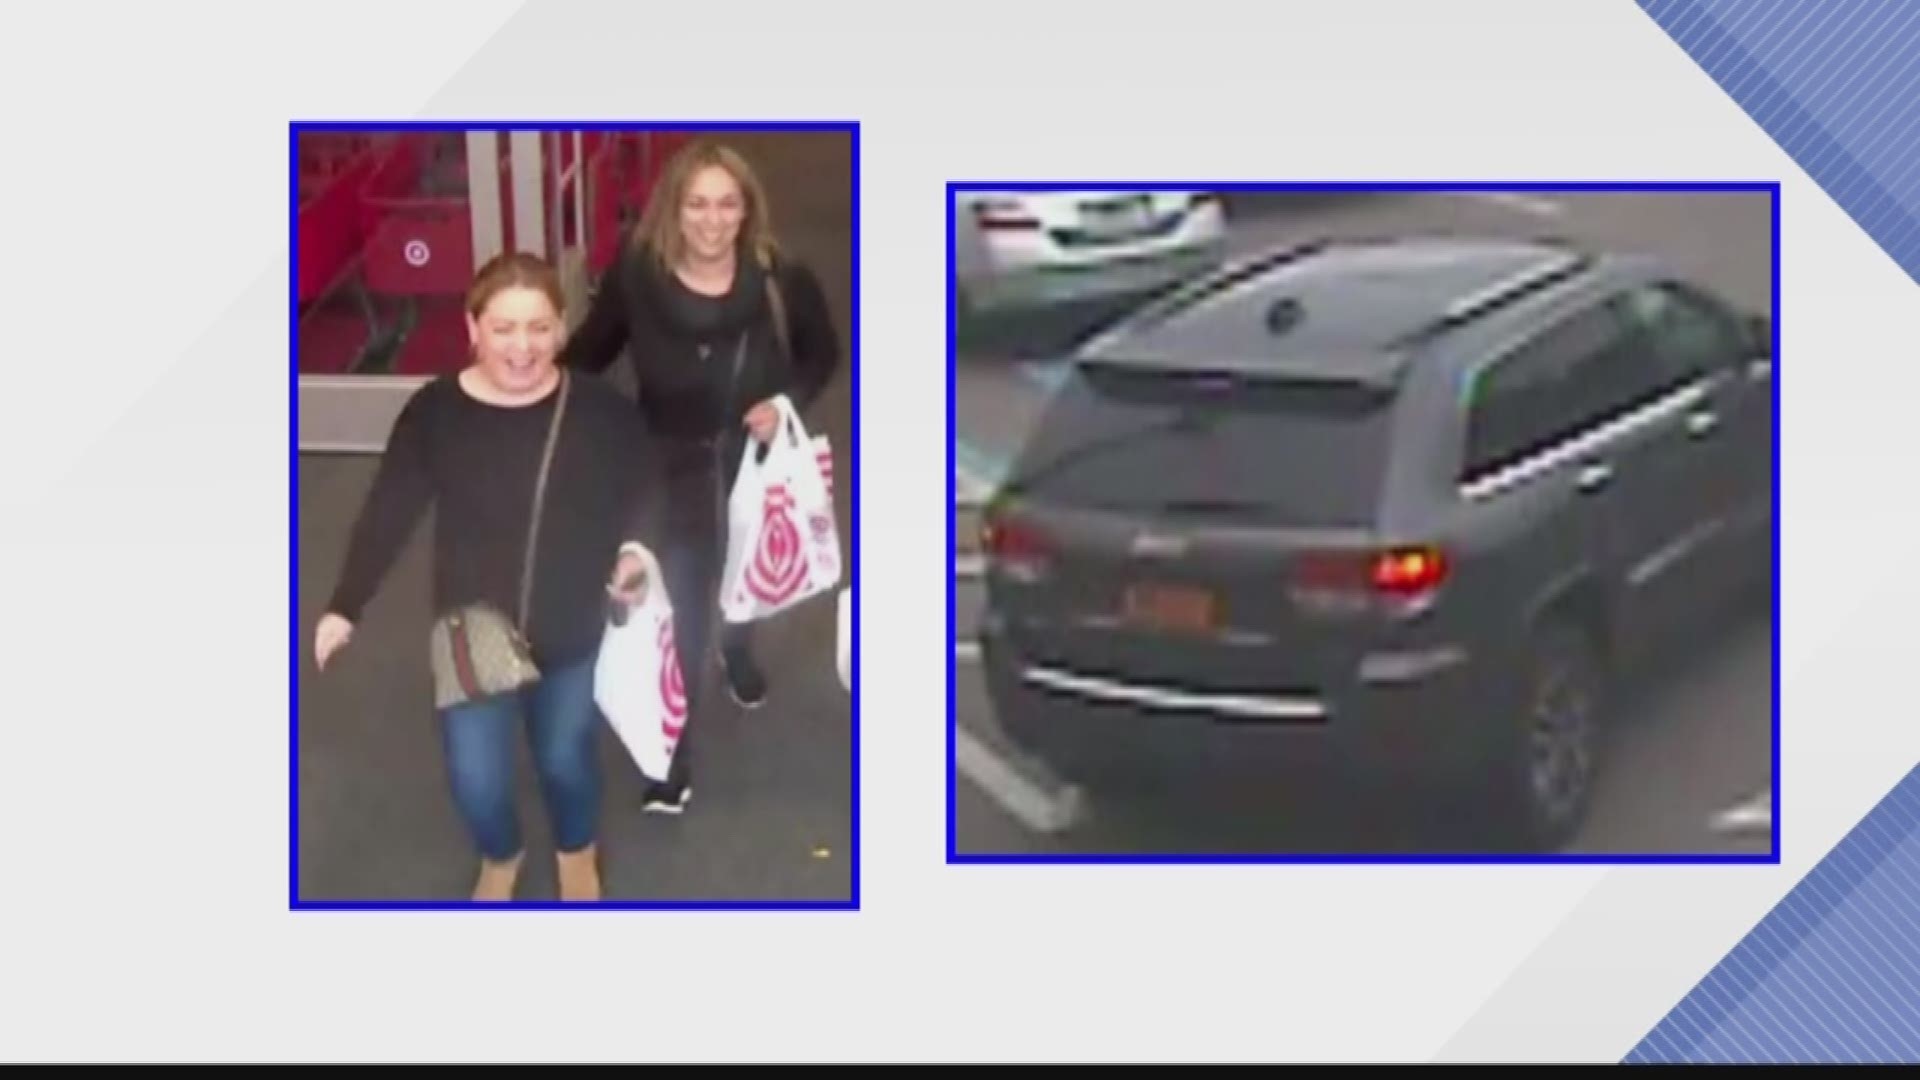 The women are accused of stealing an elderly woman's credit card and using $5K at Target.